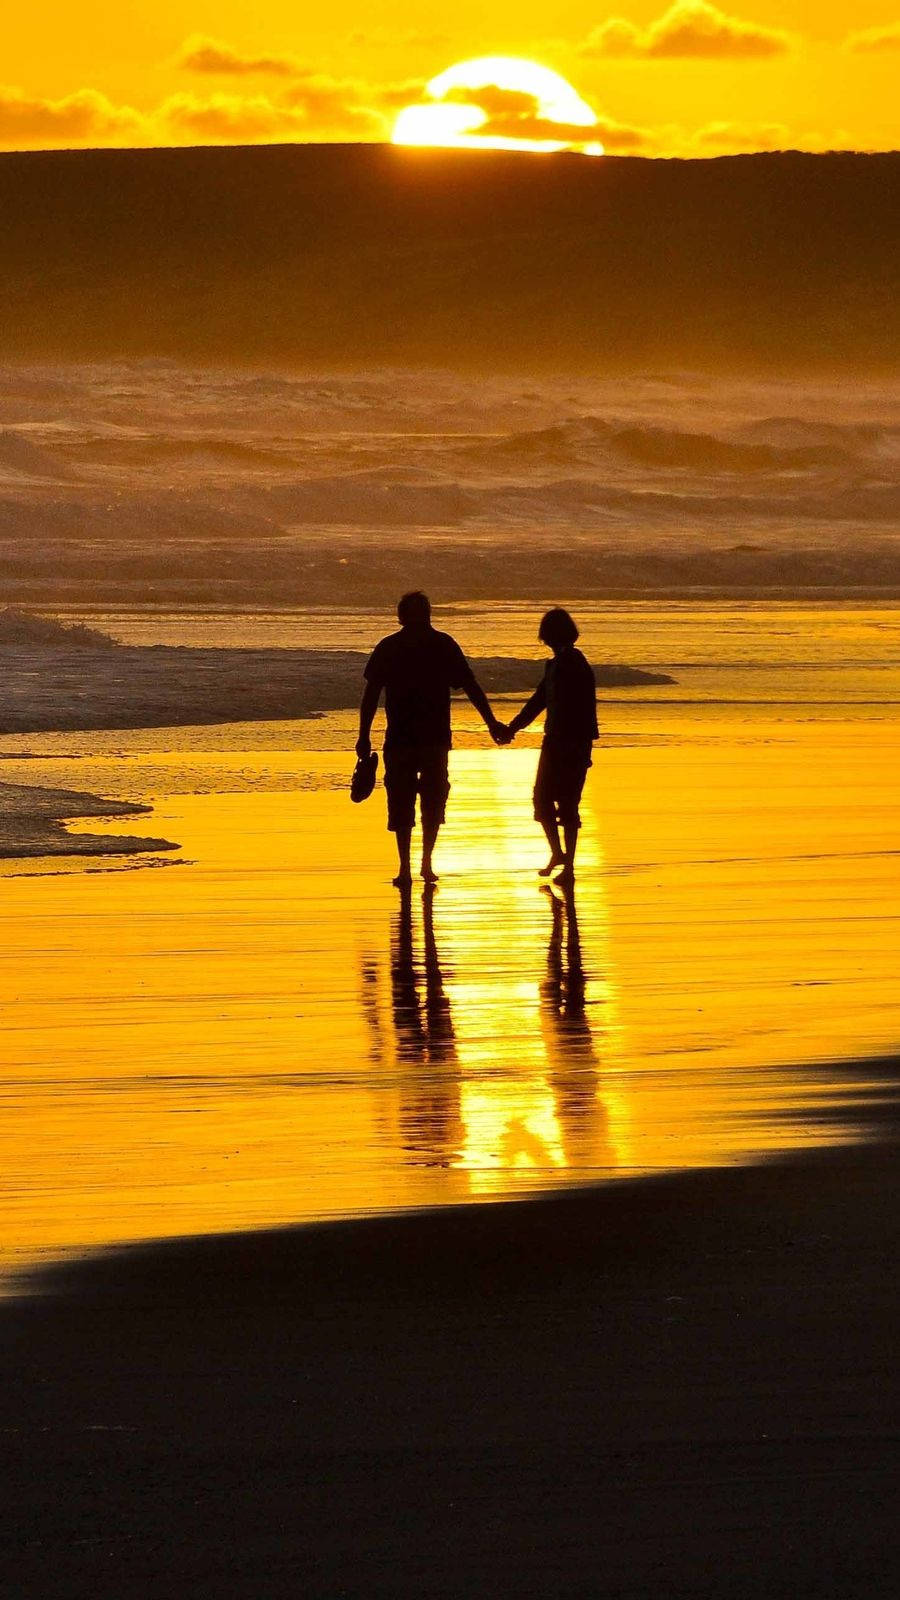 Holding Hands At Sunset On The Beach